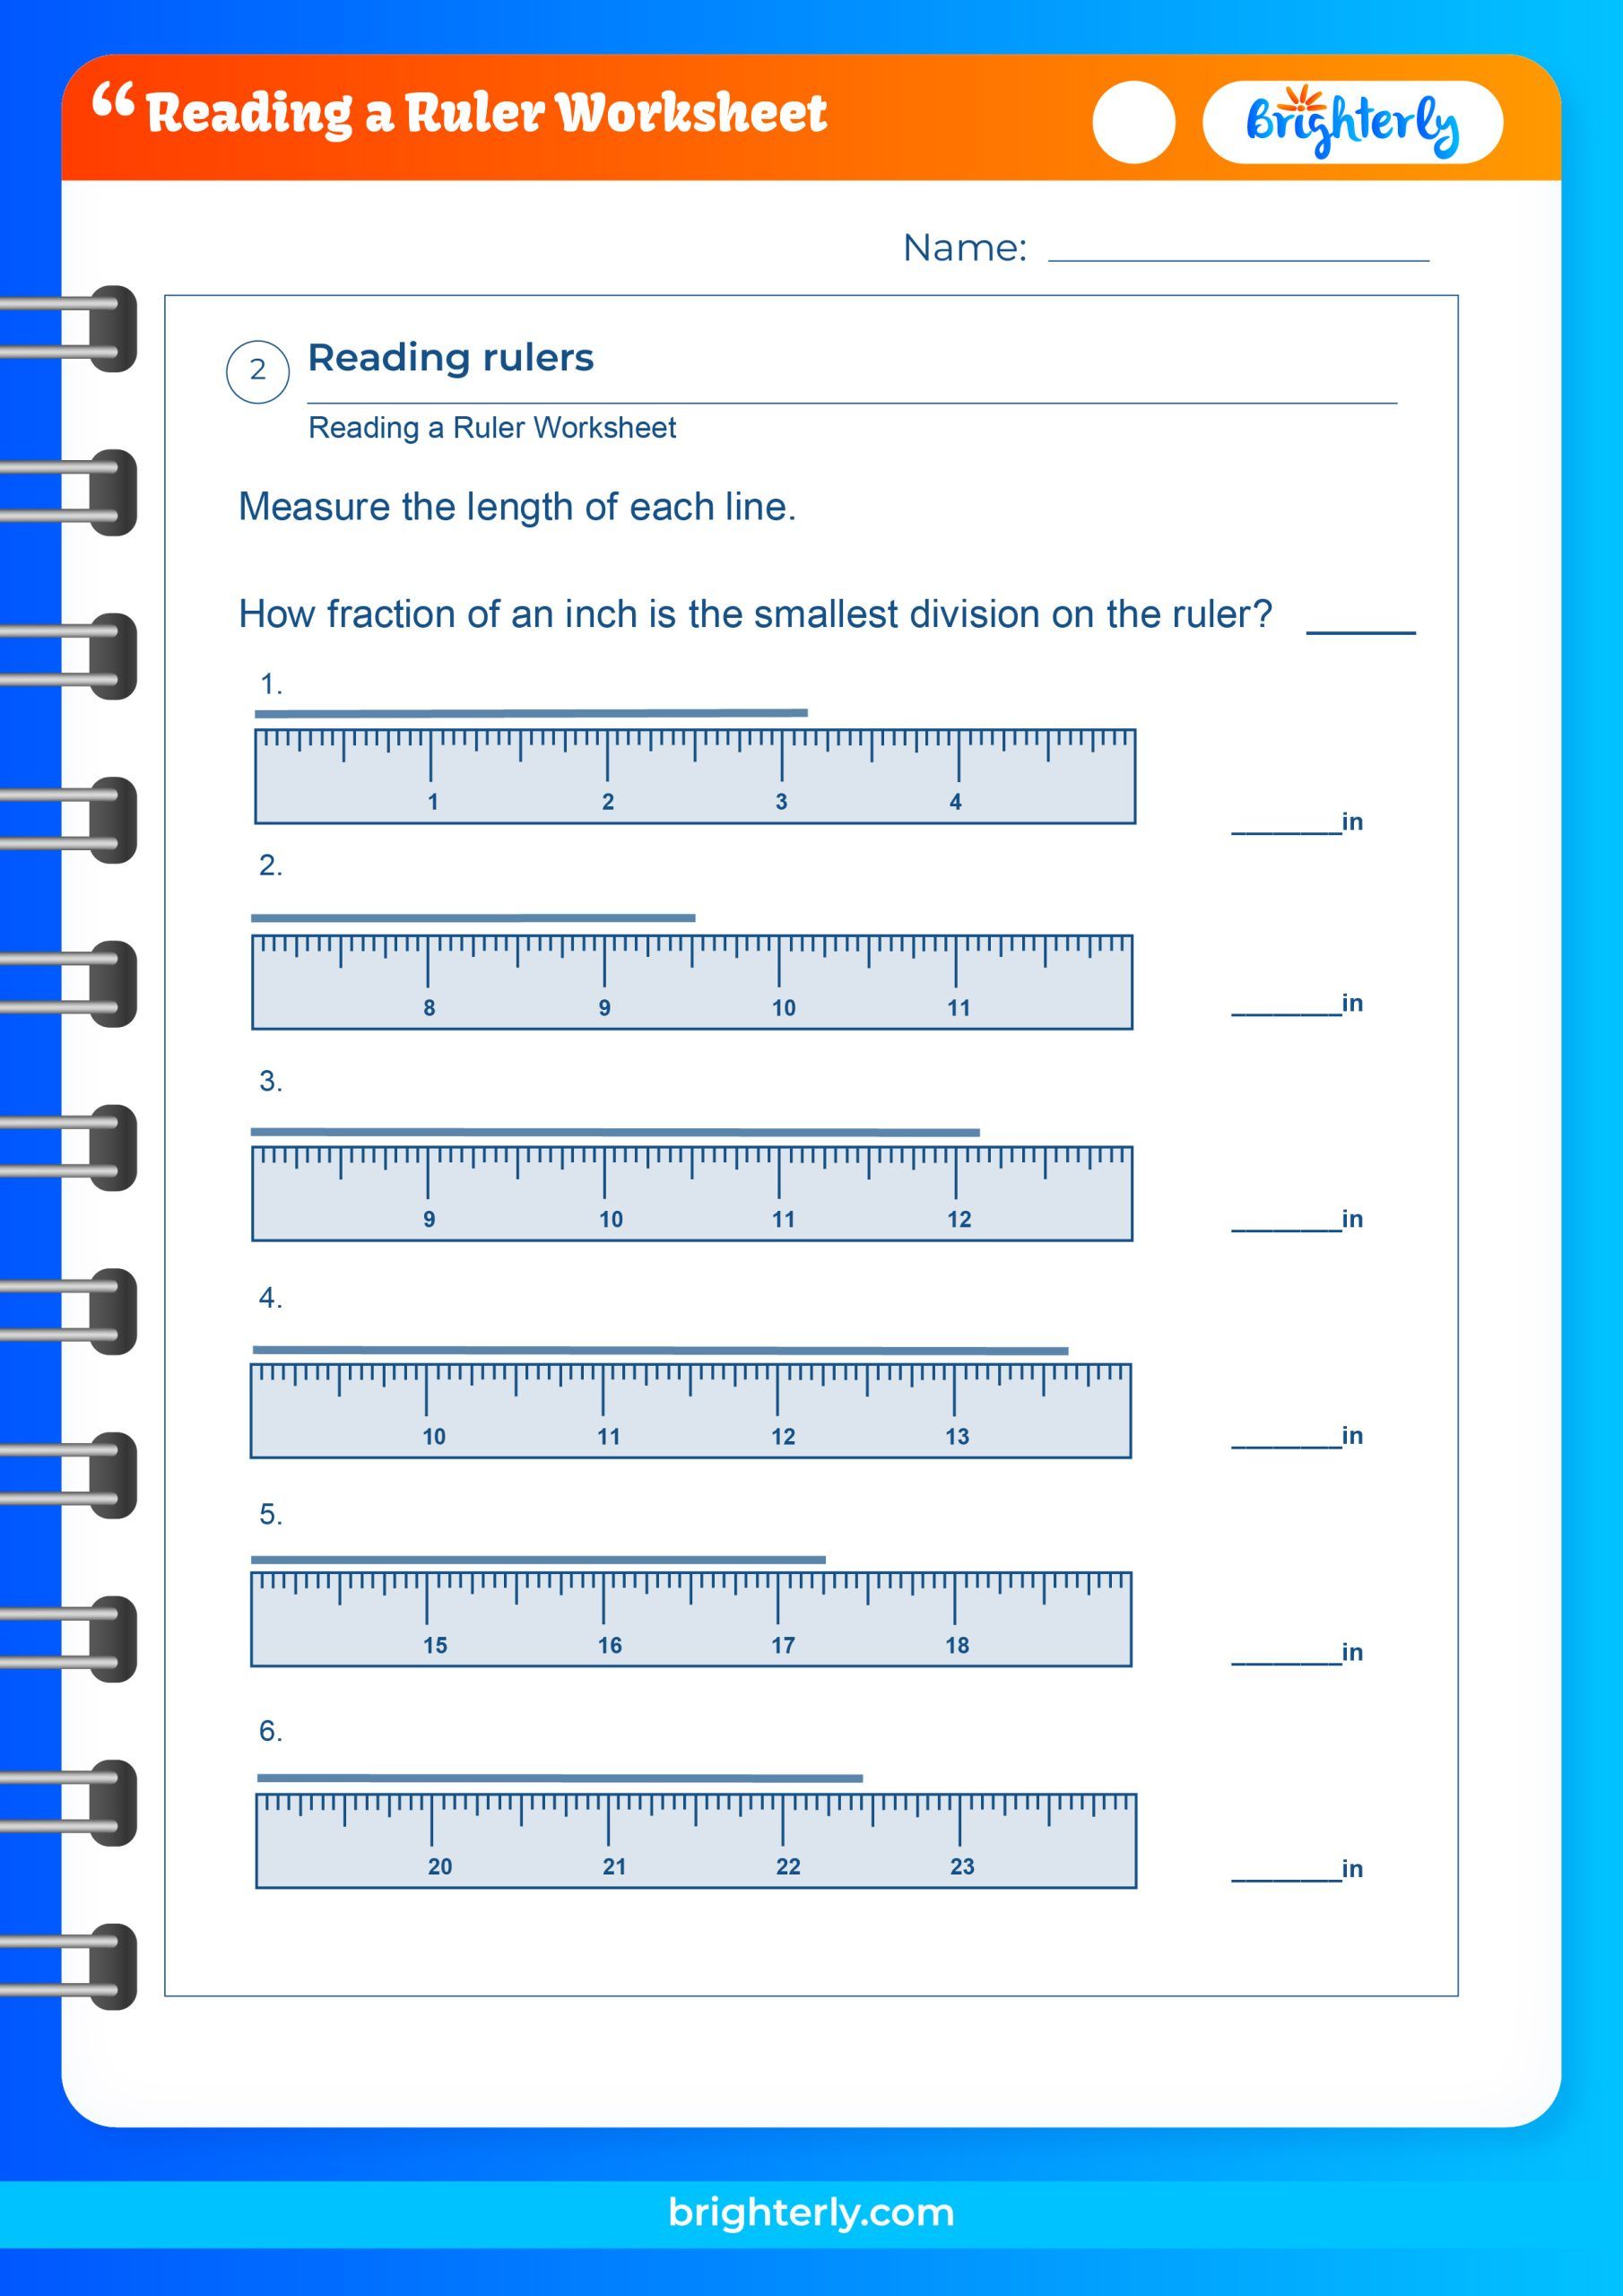 free-reading-a-ruler-worksheets-for-kids-pdfs-brighterly